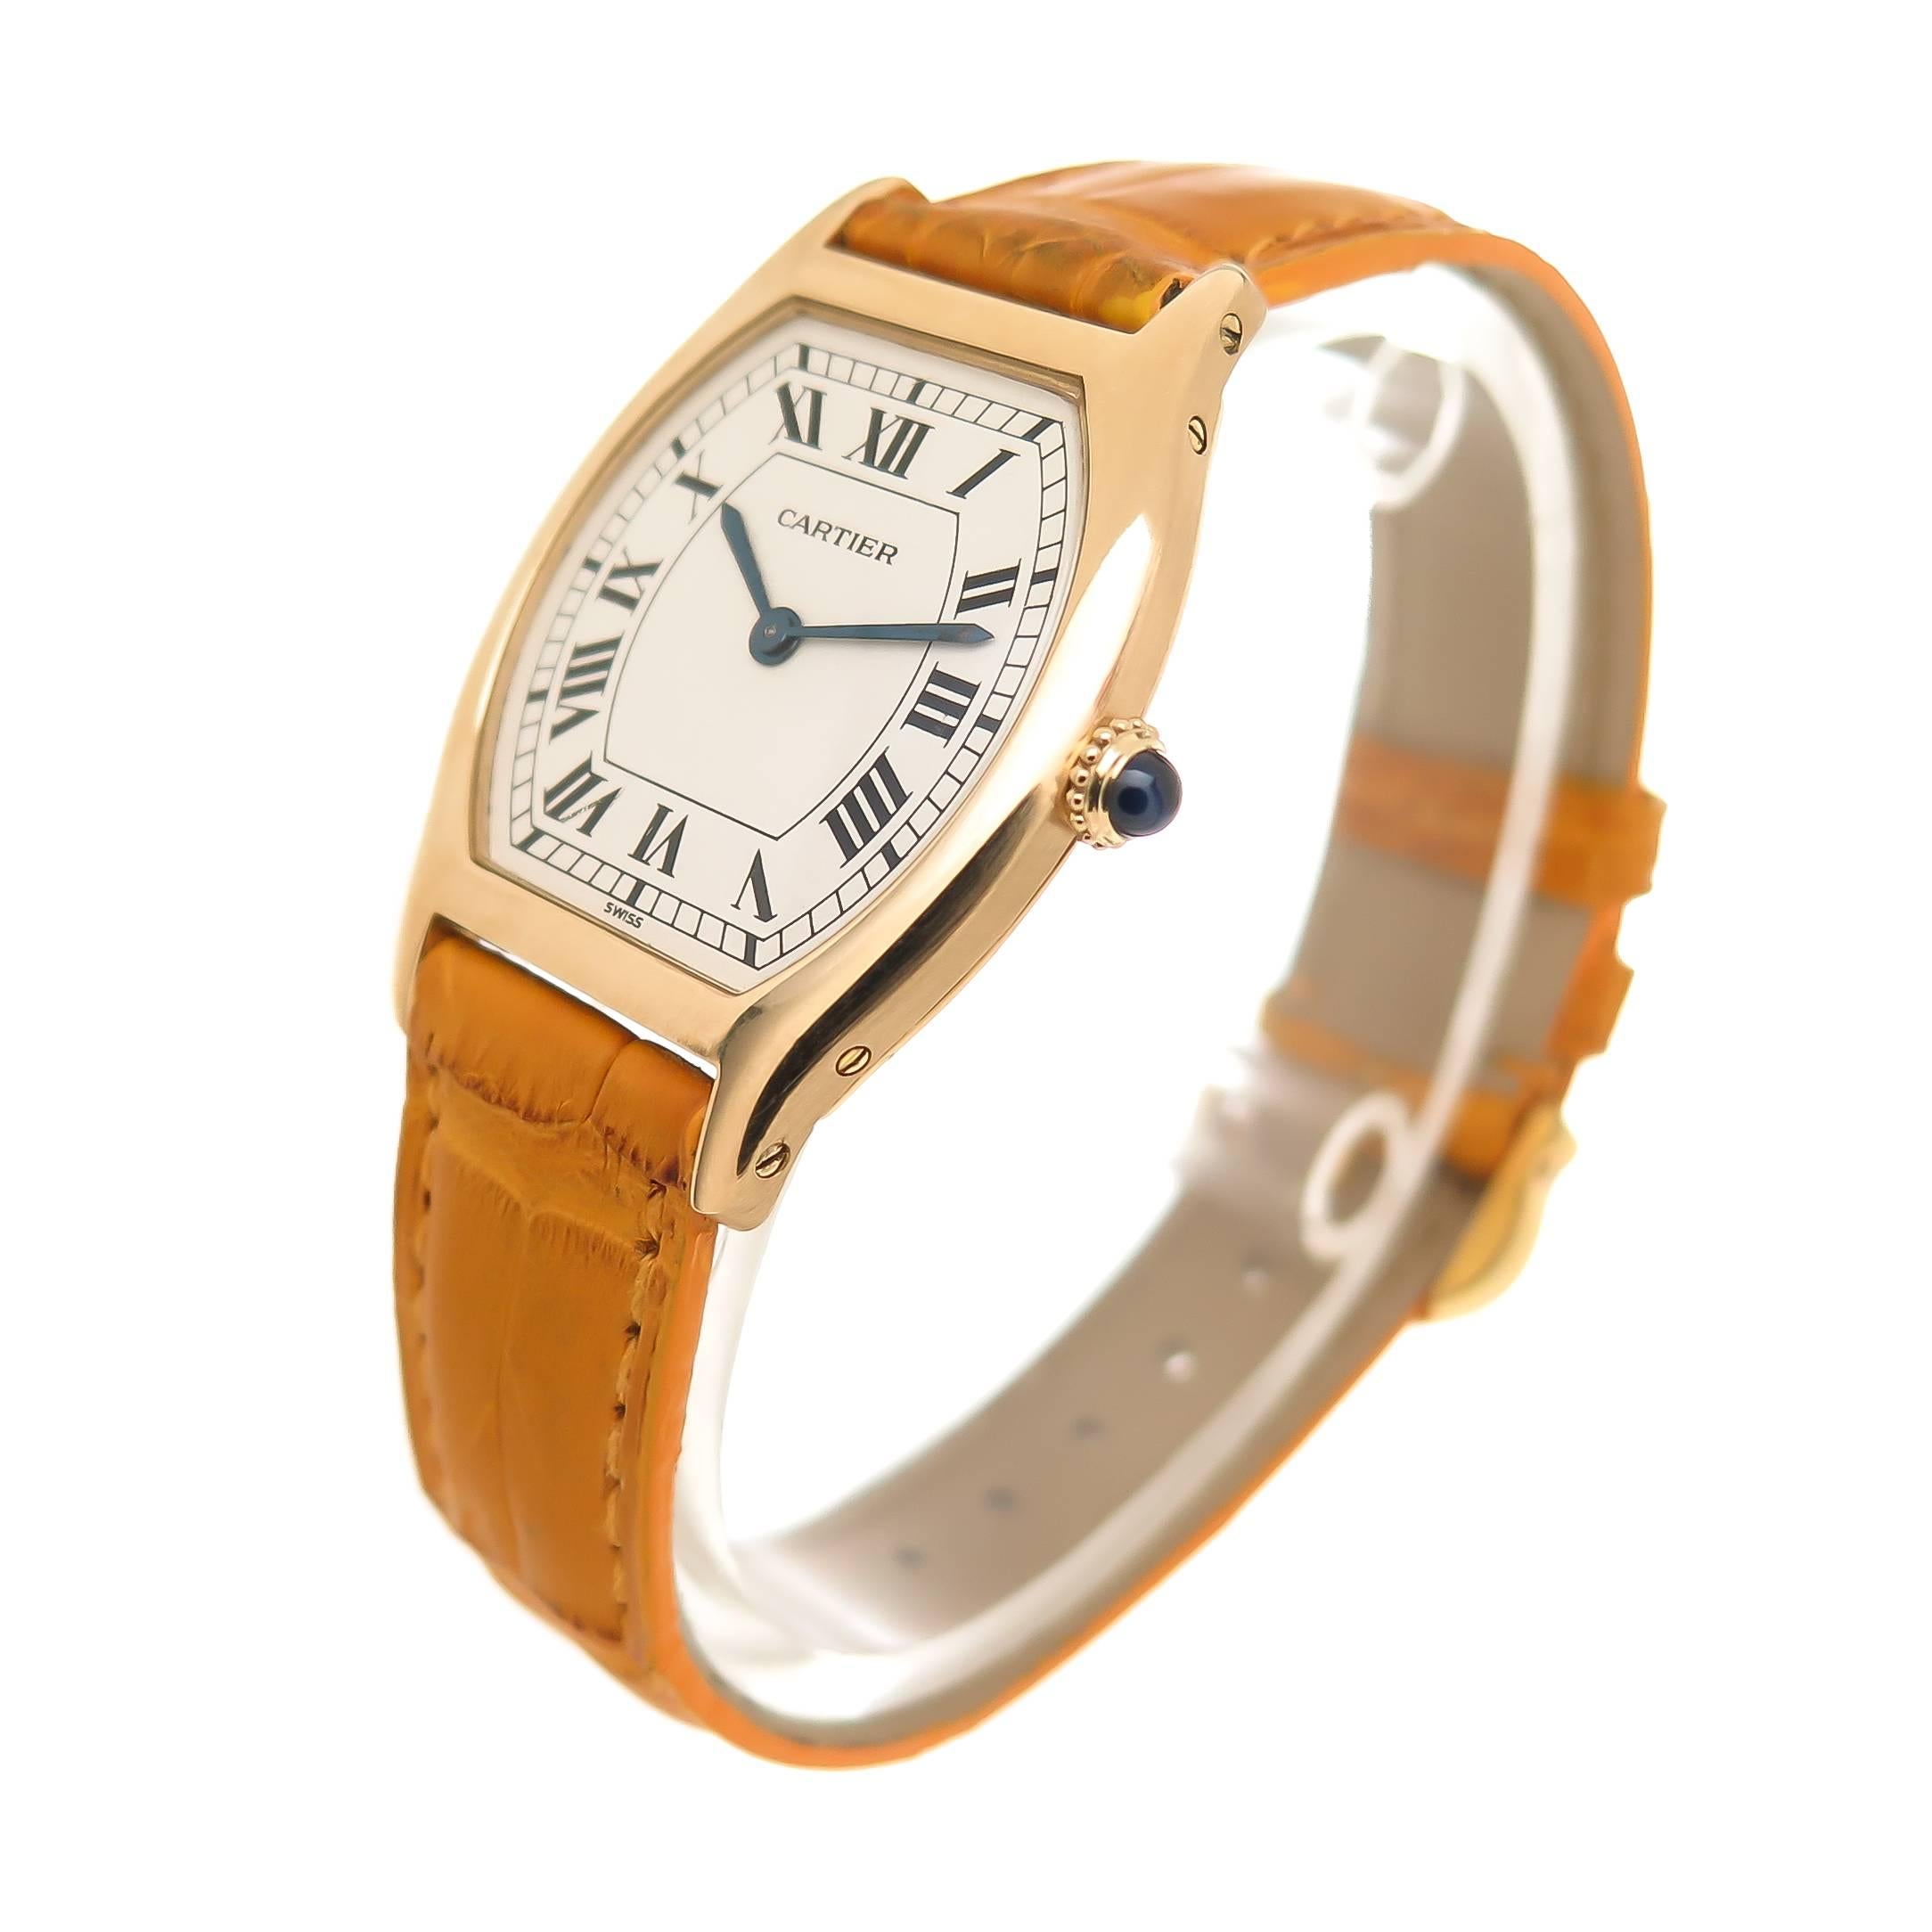 Circa 2000 Cartier Tortue 18K Yellow Gold Wrist watch, 36 X 28 MM Water Resistant case. White Dial with Black roman numerals. Manual wind mechanical movement, sapphire Crown. New Cartier Mustard color Textured Strap with Gold Plated Cartier Buckle.